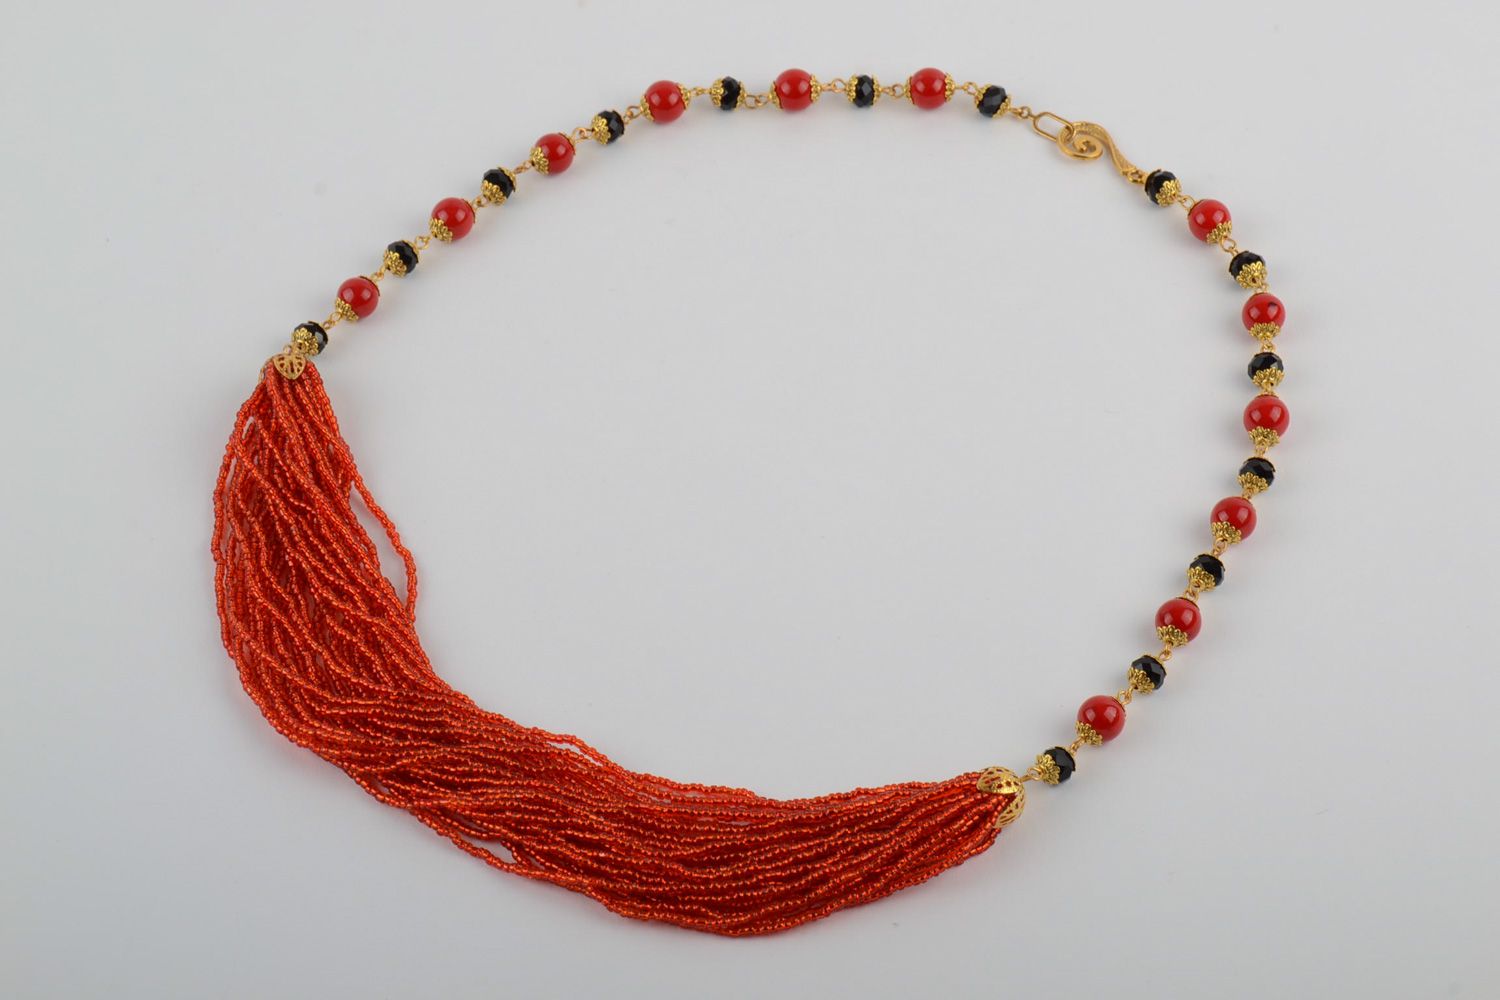 Handmade multi row necklace woven of Czech and wooden beads of red and black colors photo 1